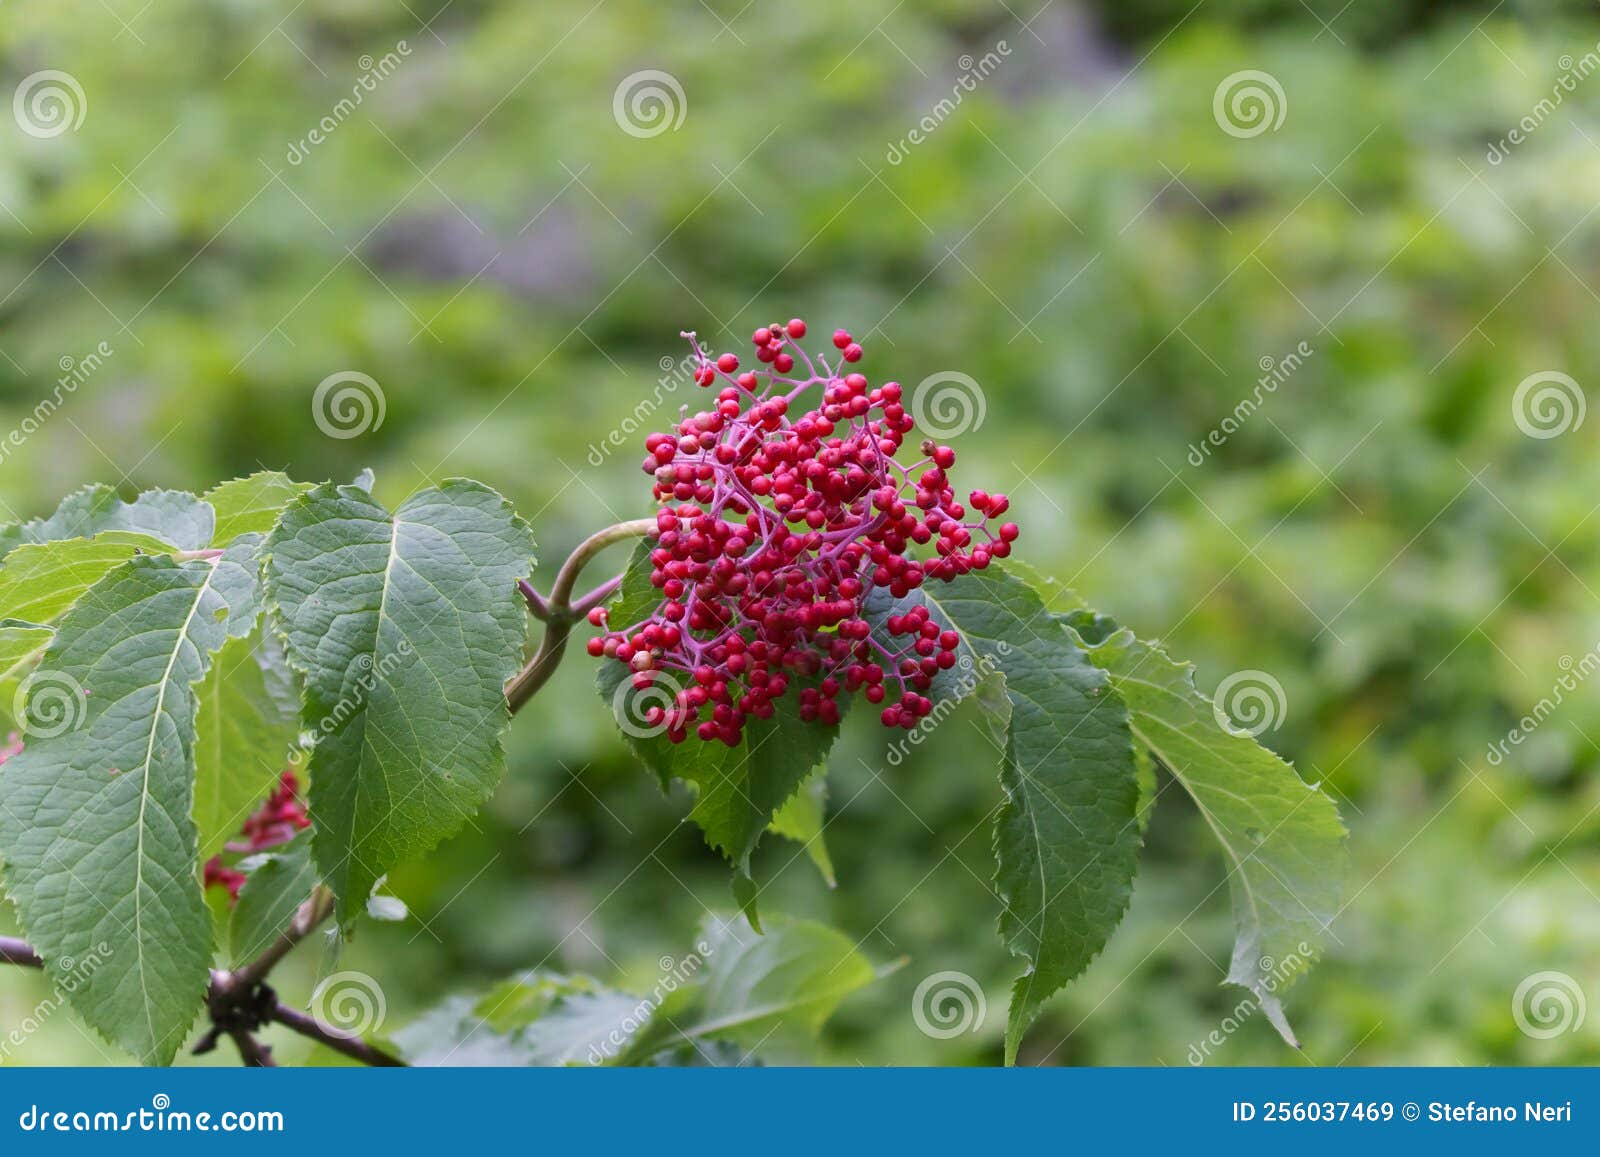 characteristic red berries of the gaspesie national park, canada